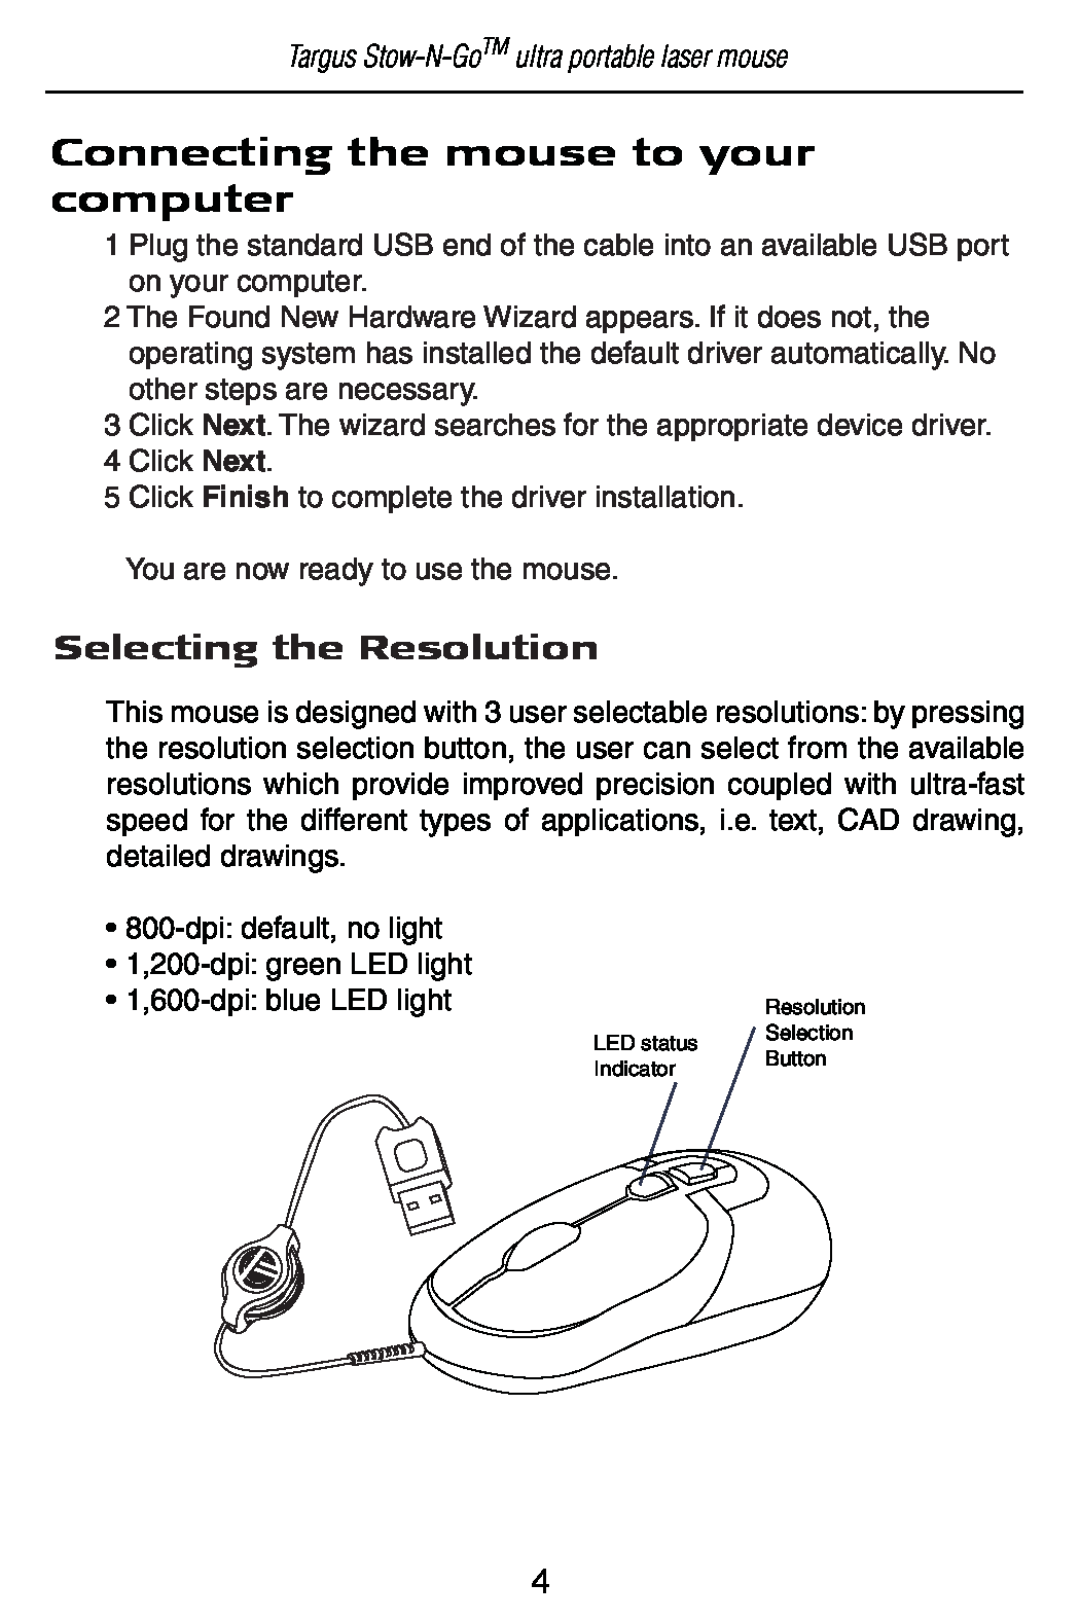 Targus AMU22US specifications Connecting the mouse to your computer, Selecting the Resolution 